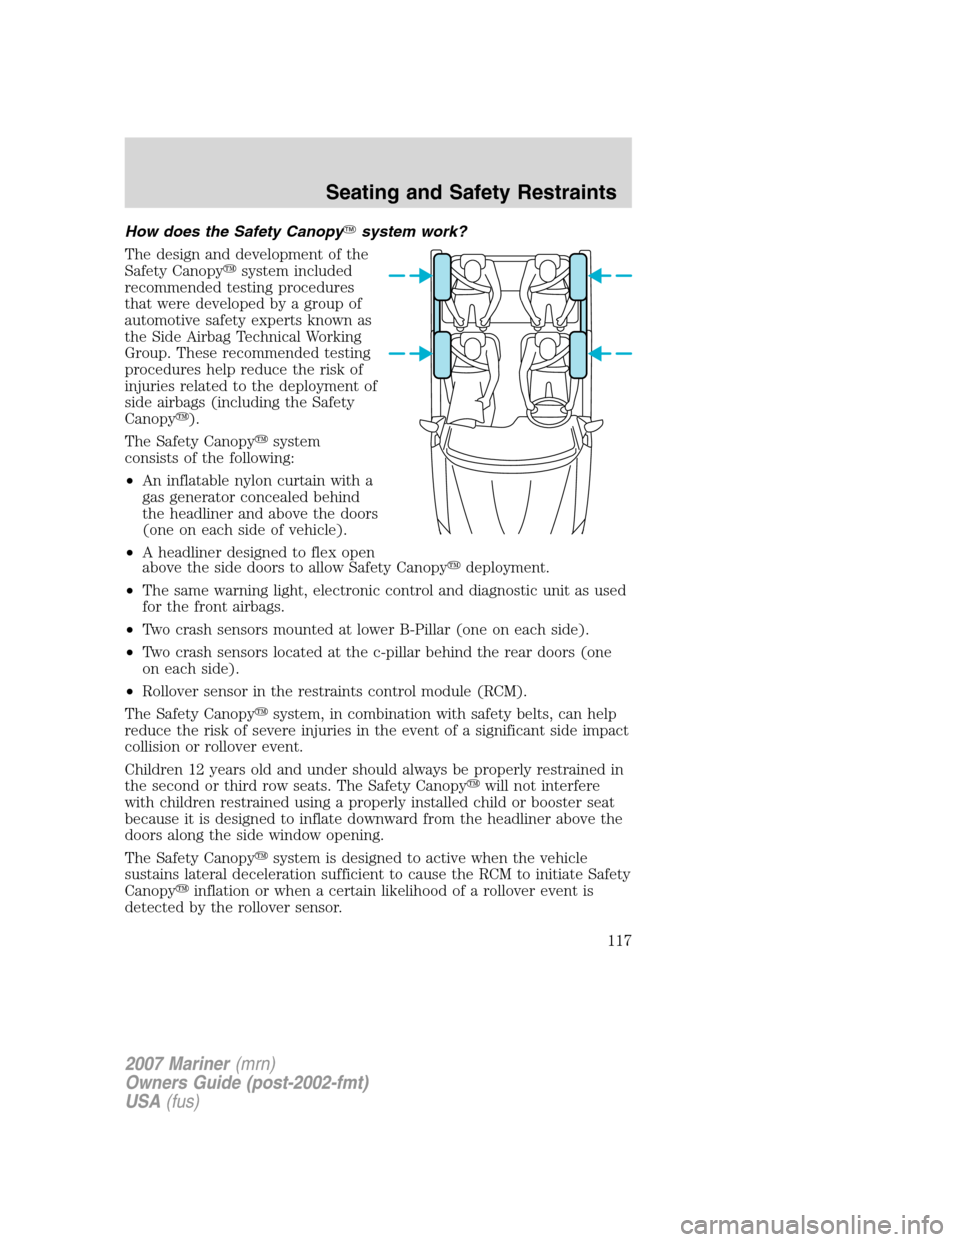 Mercury Mariner 2007  Owners Manuals How does the Safety Canopysystem work?
The design and development of the
Safety Canopysystem included
recommended testing procedures
that were developed by a group of
automotive safety experts known